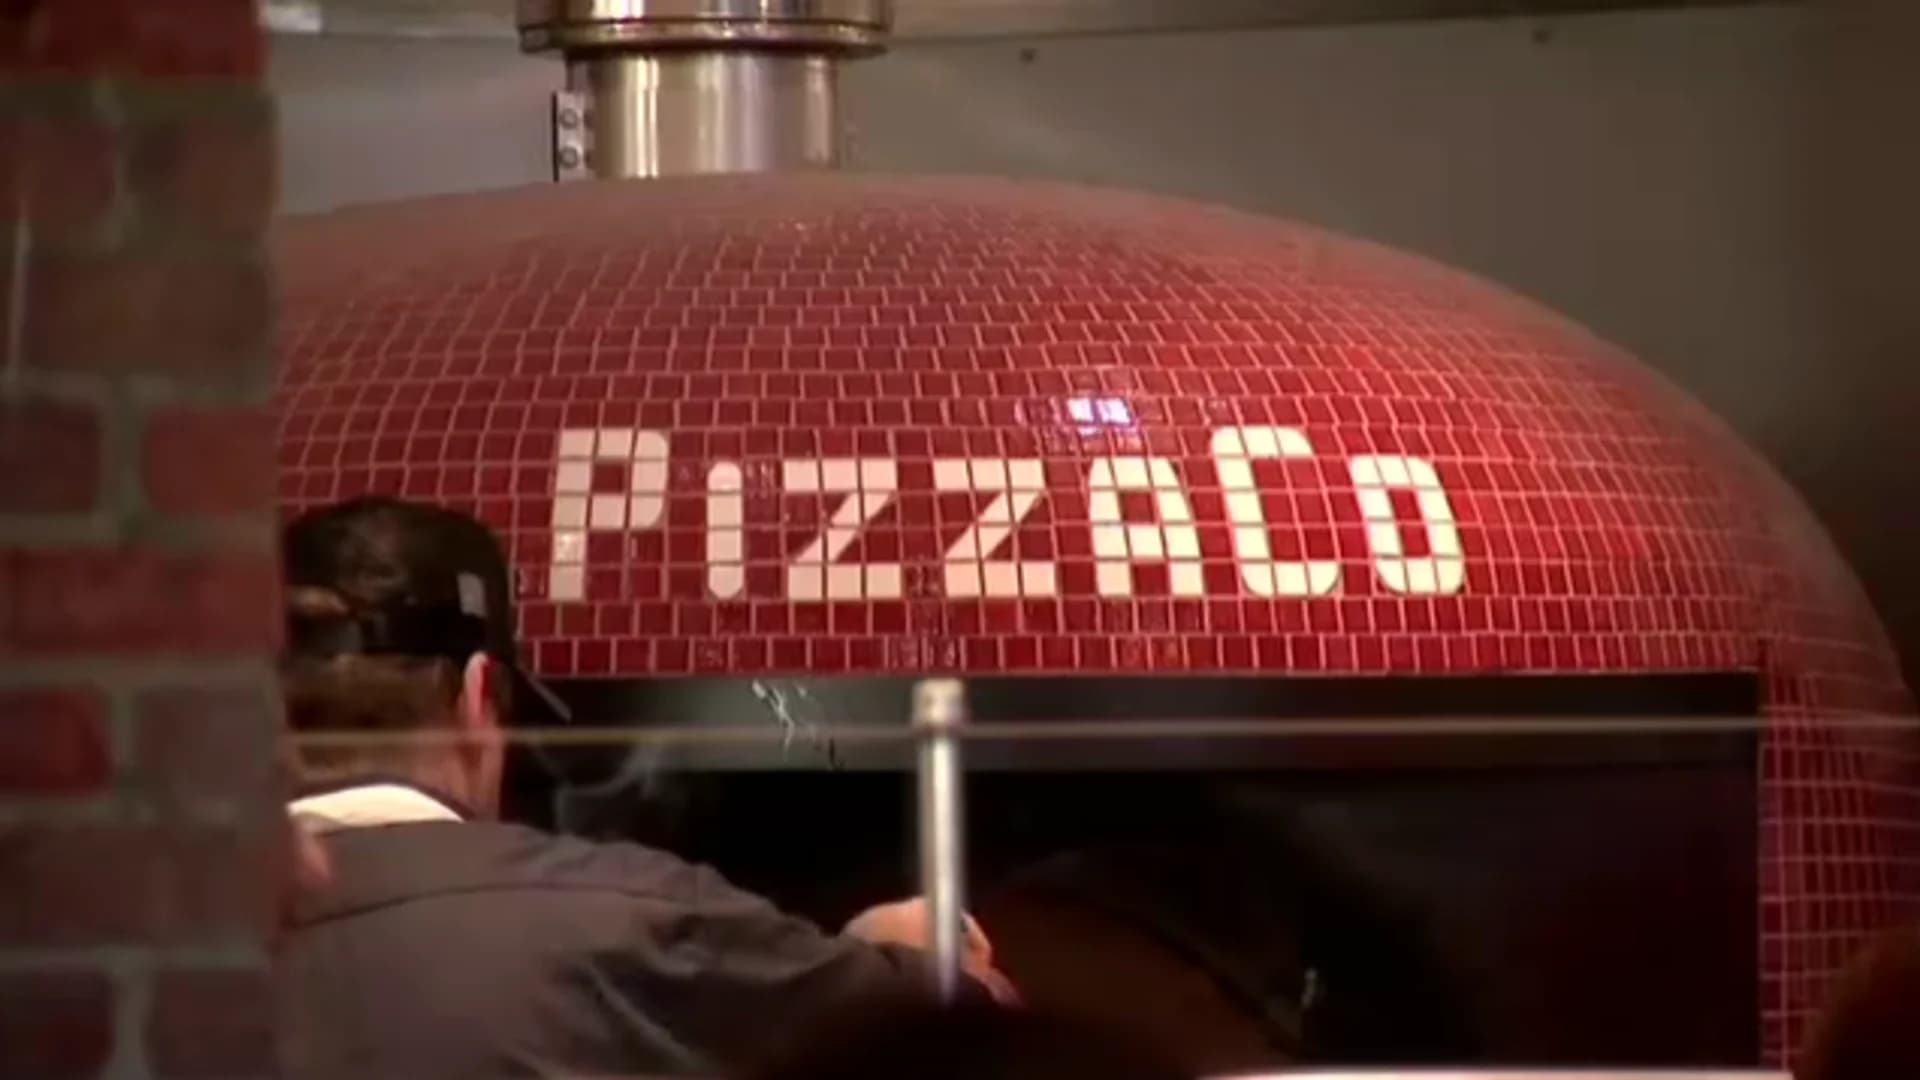 New pizzeria opens in Stratford